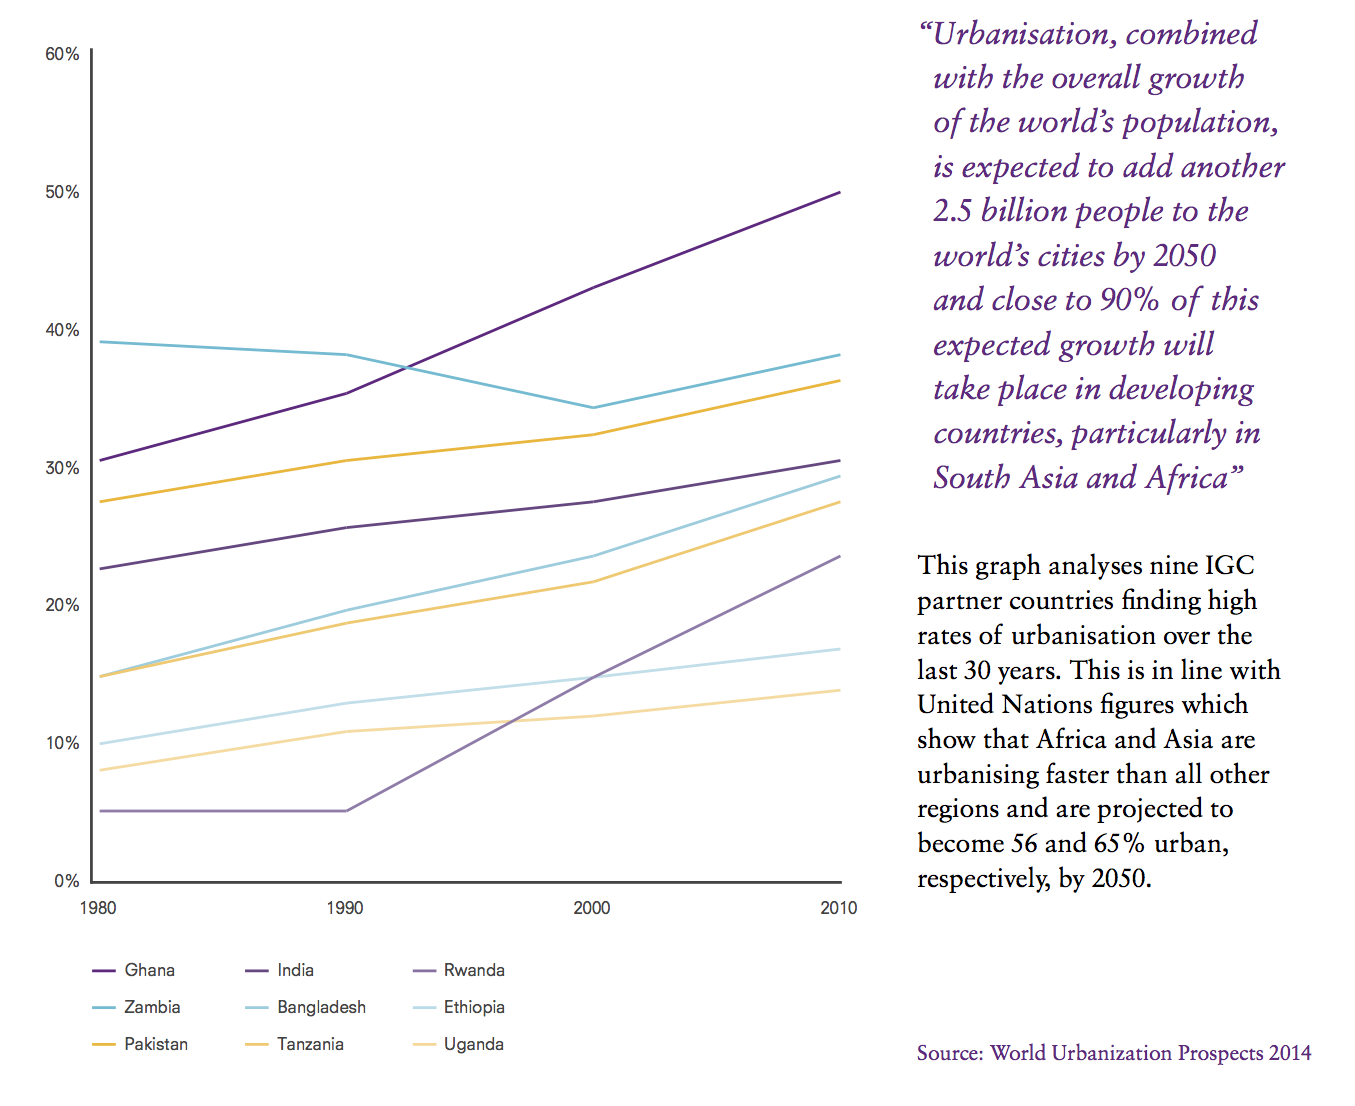 STATE OF THE WORLD'S CITIES 2012/2013 Prosperity